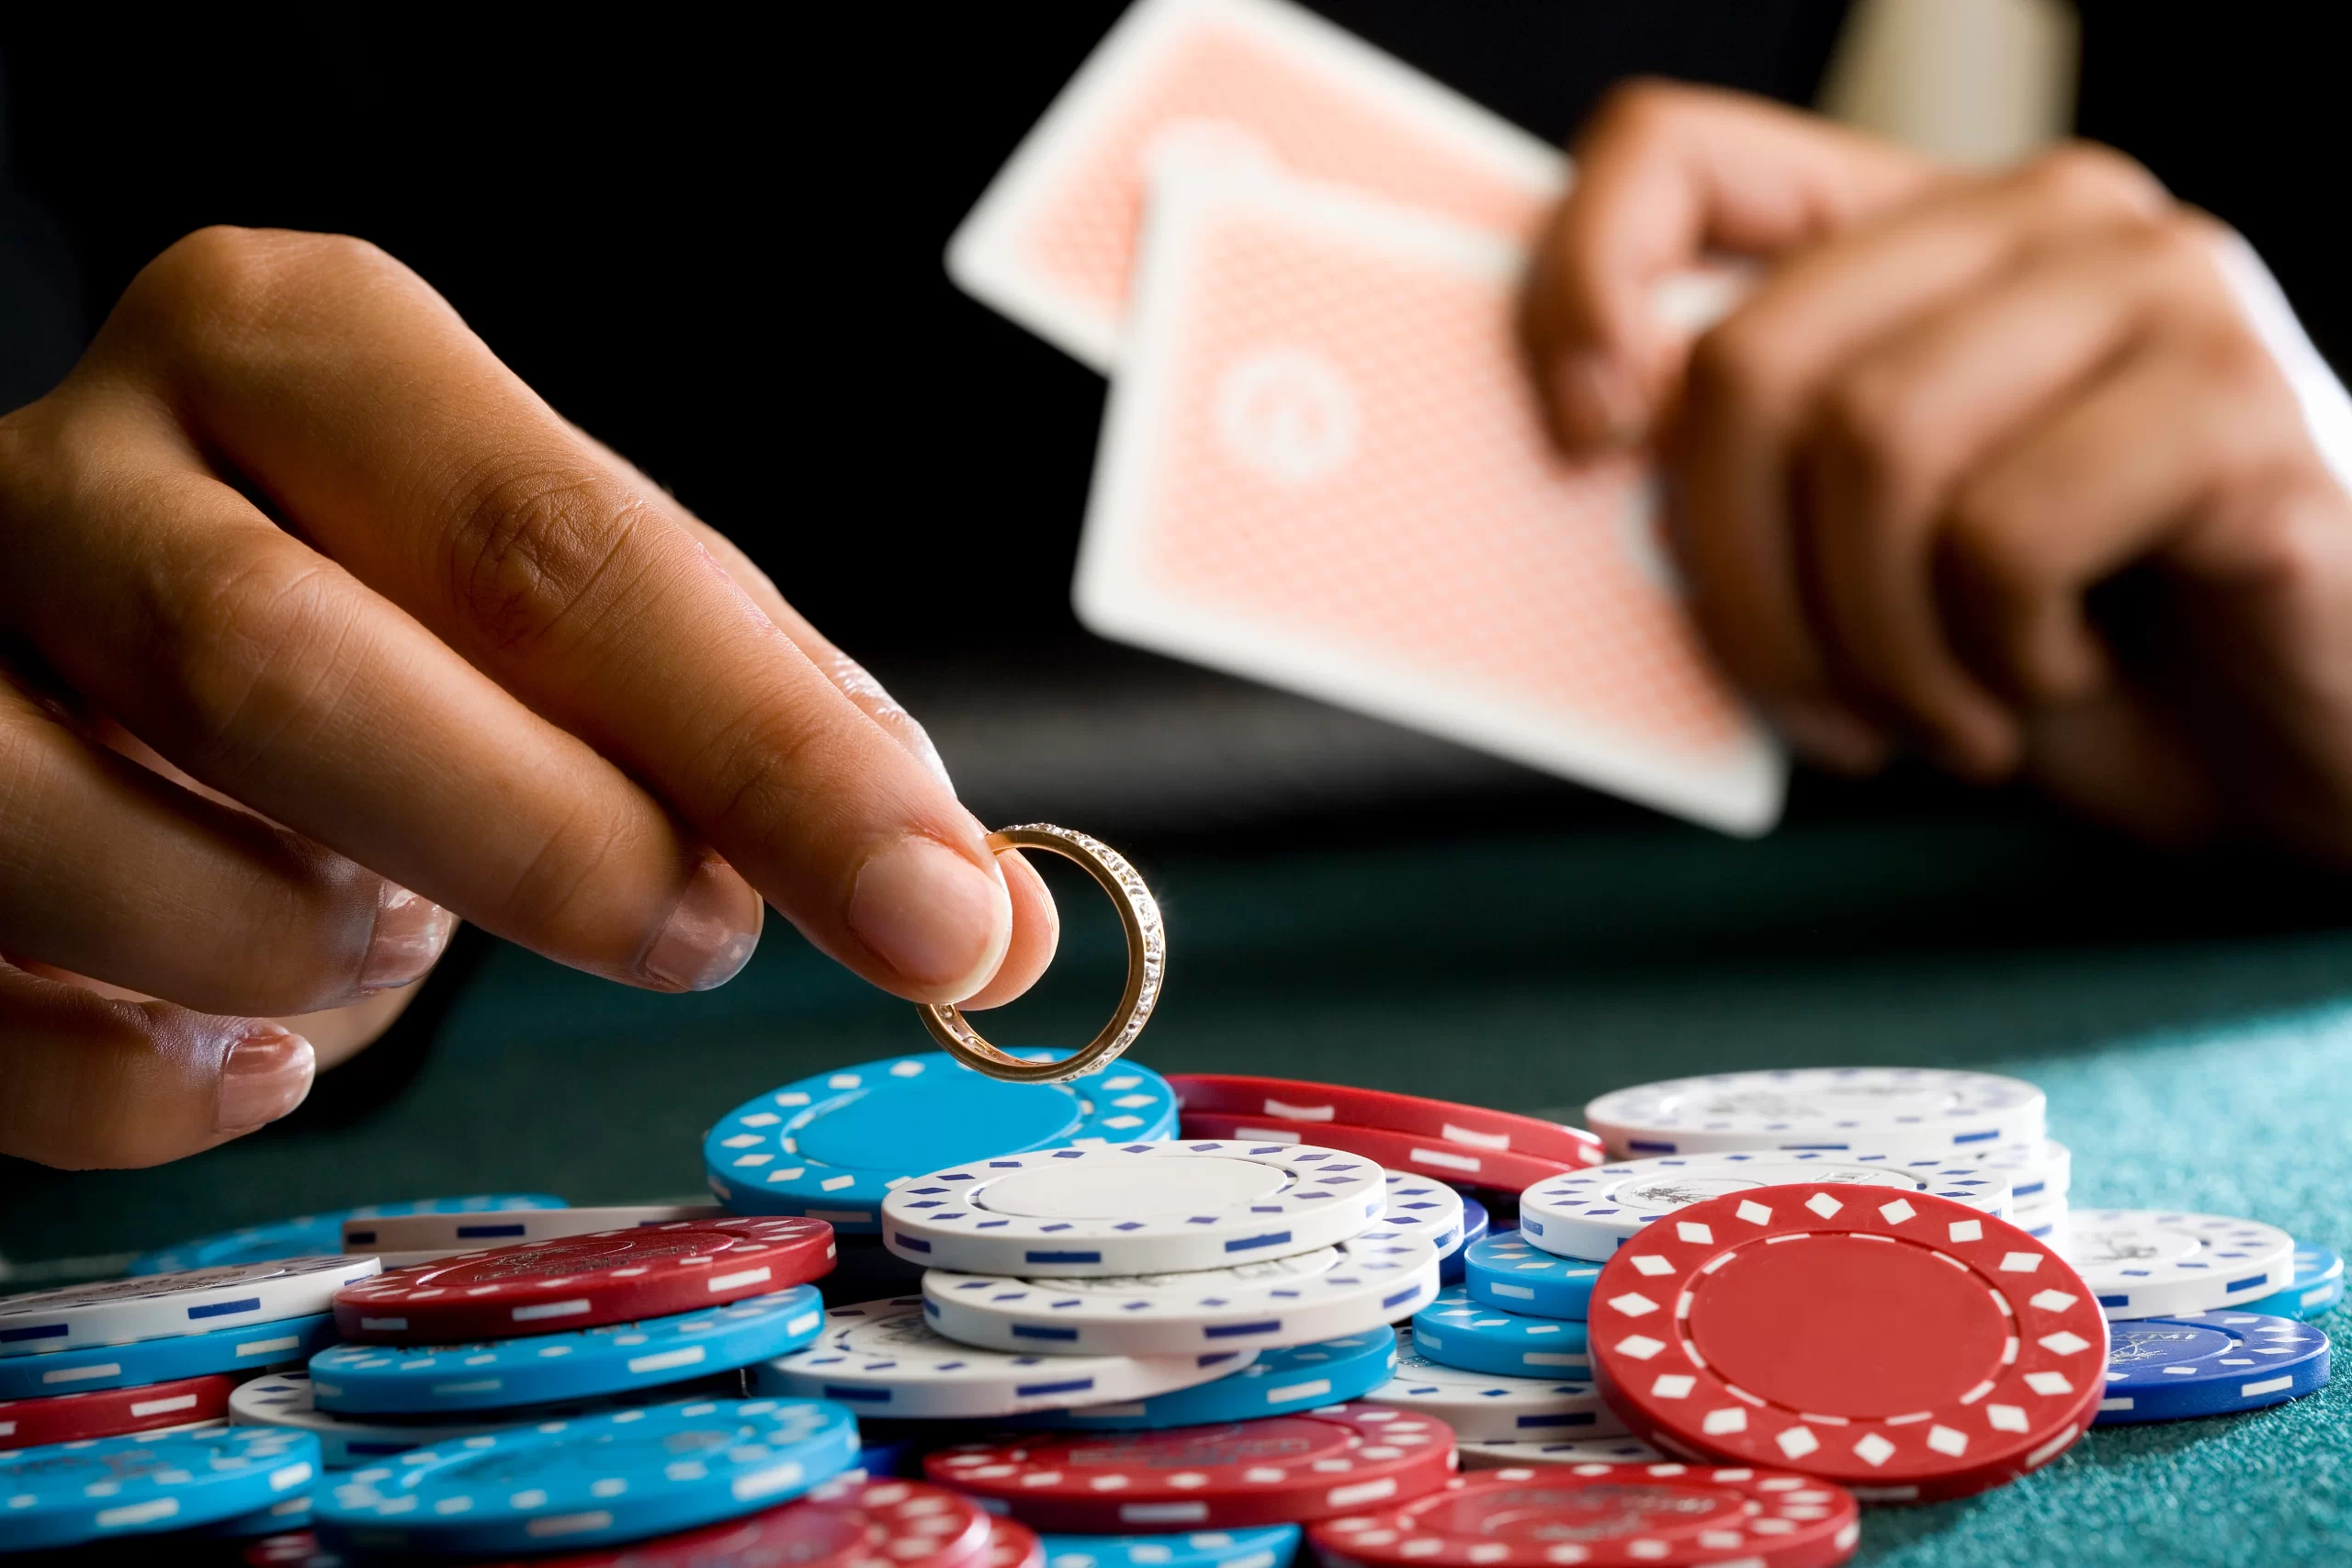 Create the best casino poker atmosphere-- the equipment, the regulations, and the hands.